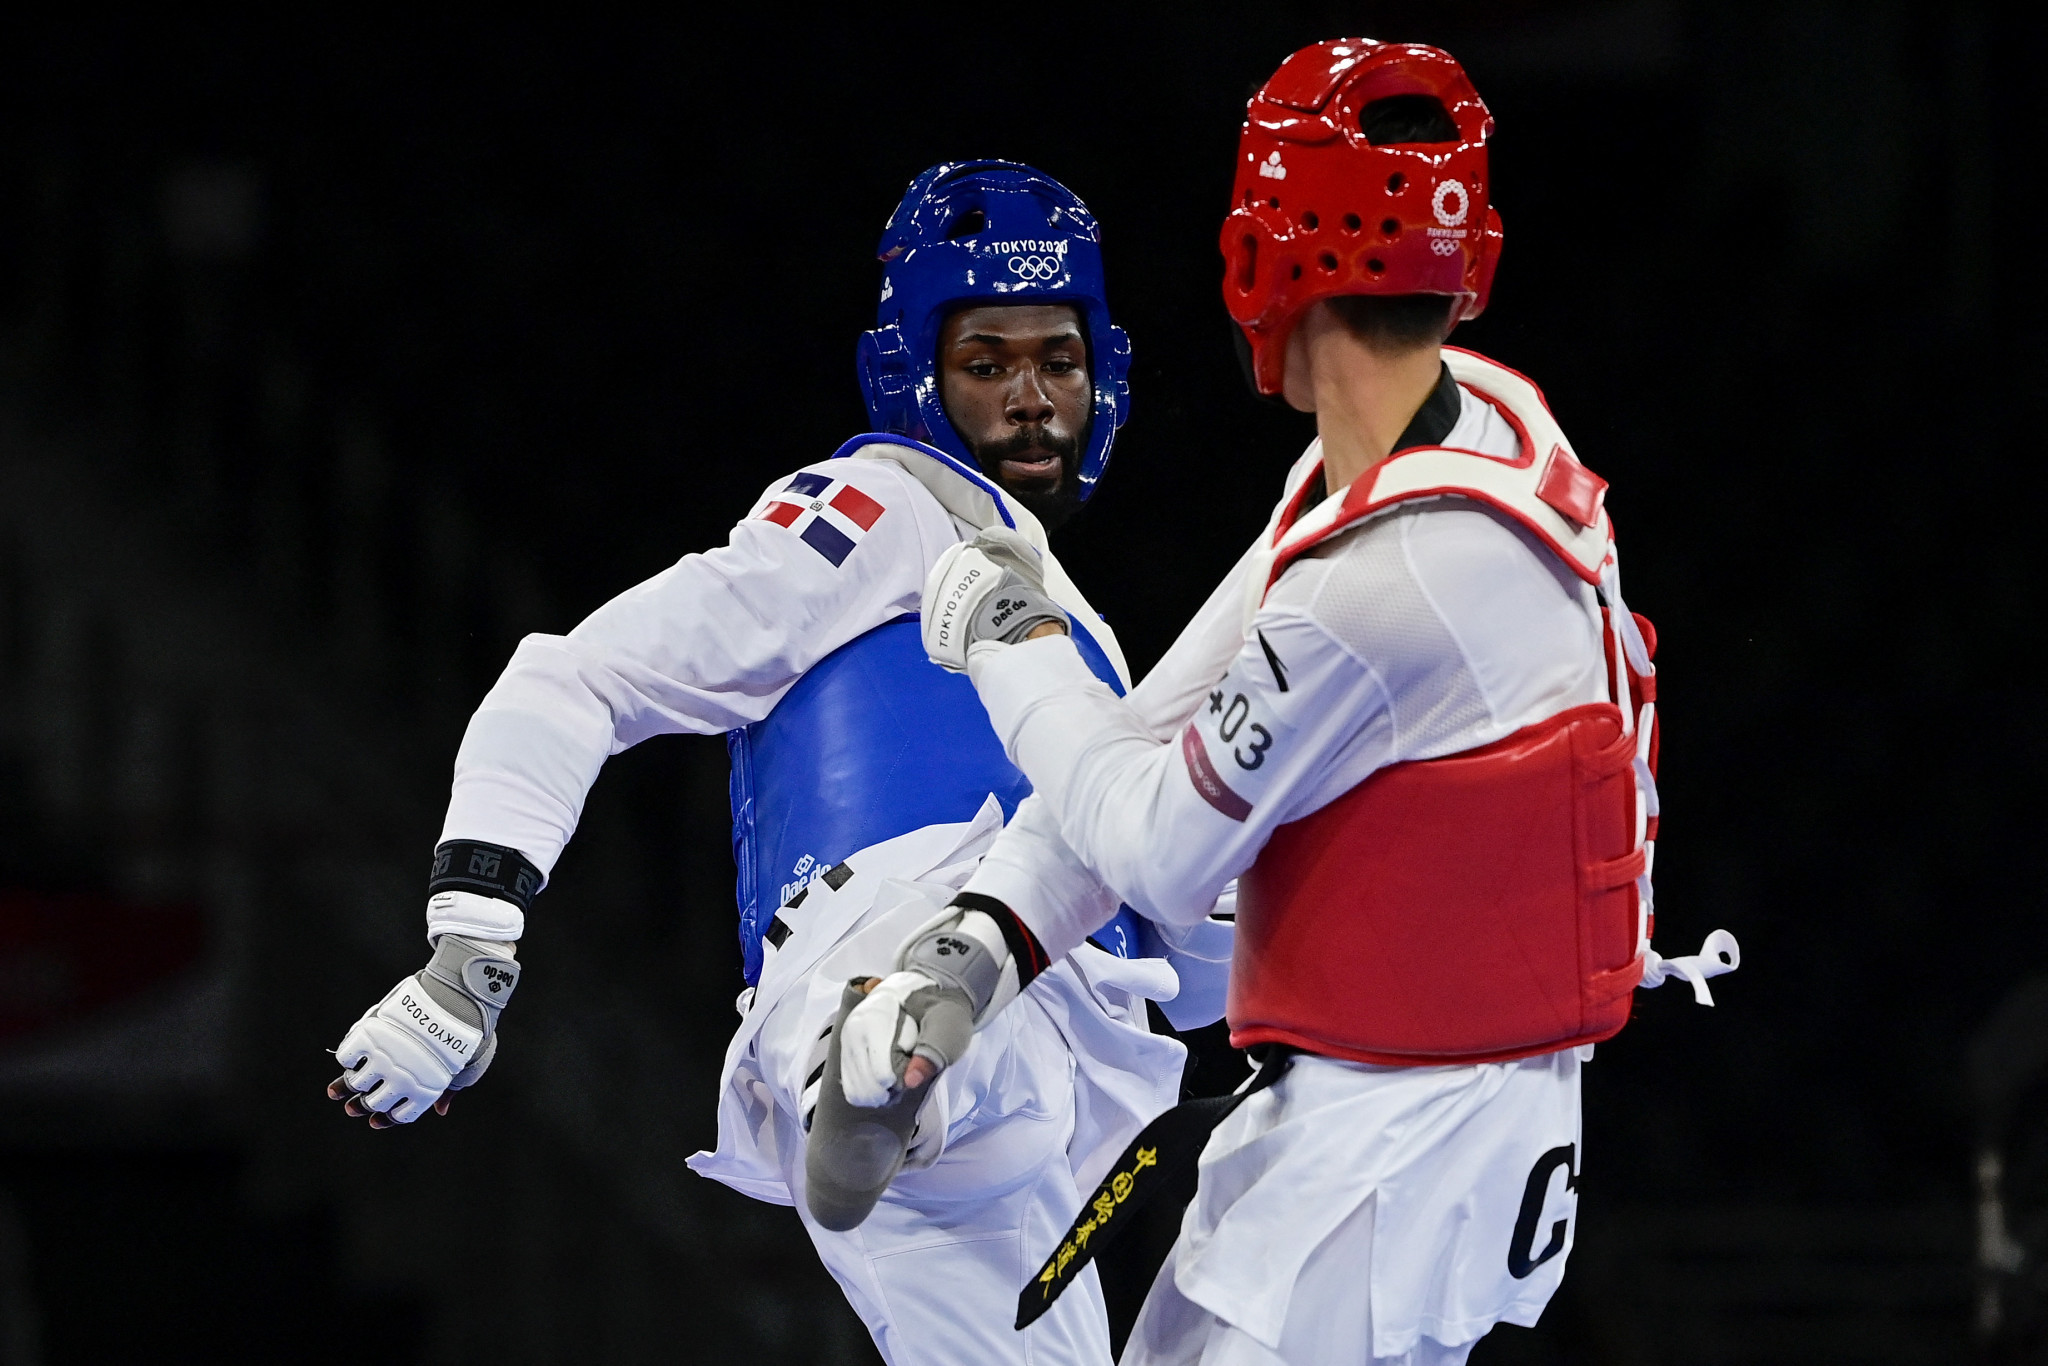 Bernardo Pié won gold for hosts Dominican Republic at the Pan American Taekwondo Championships ©Getty Images